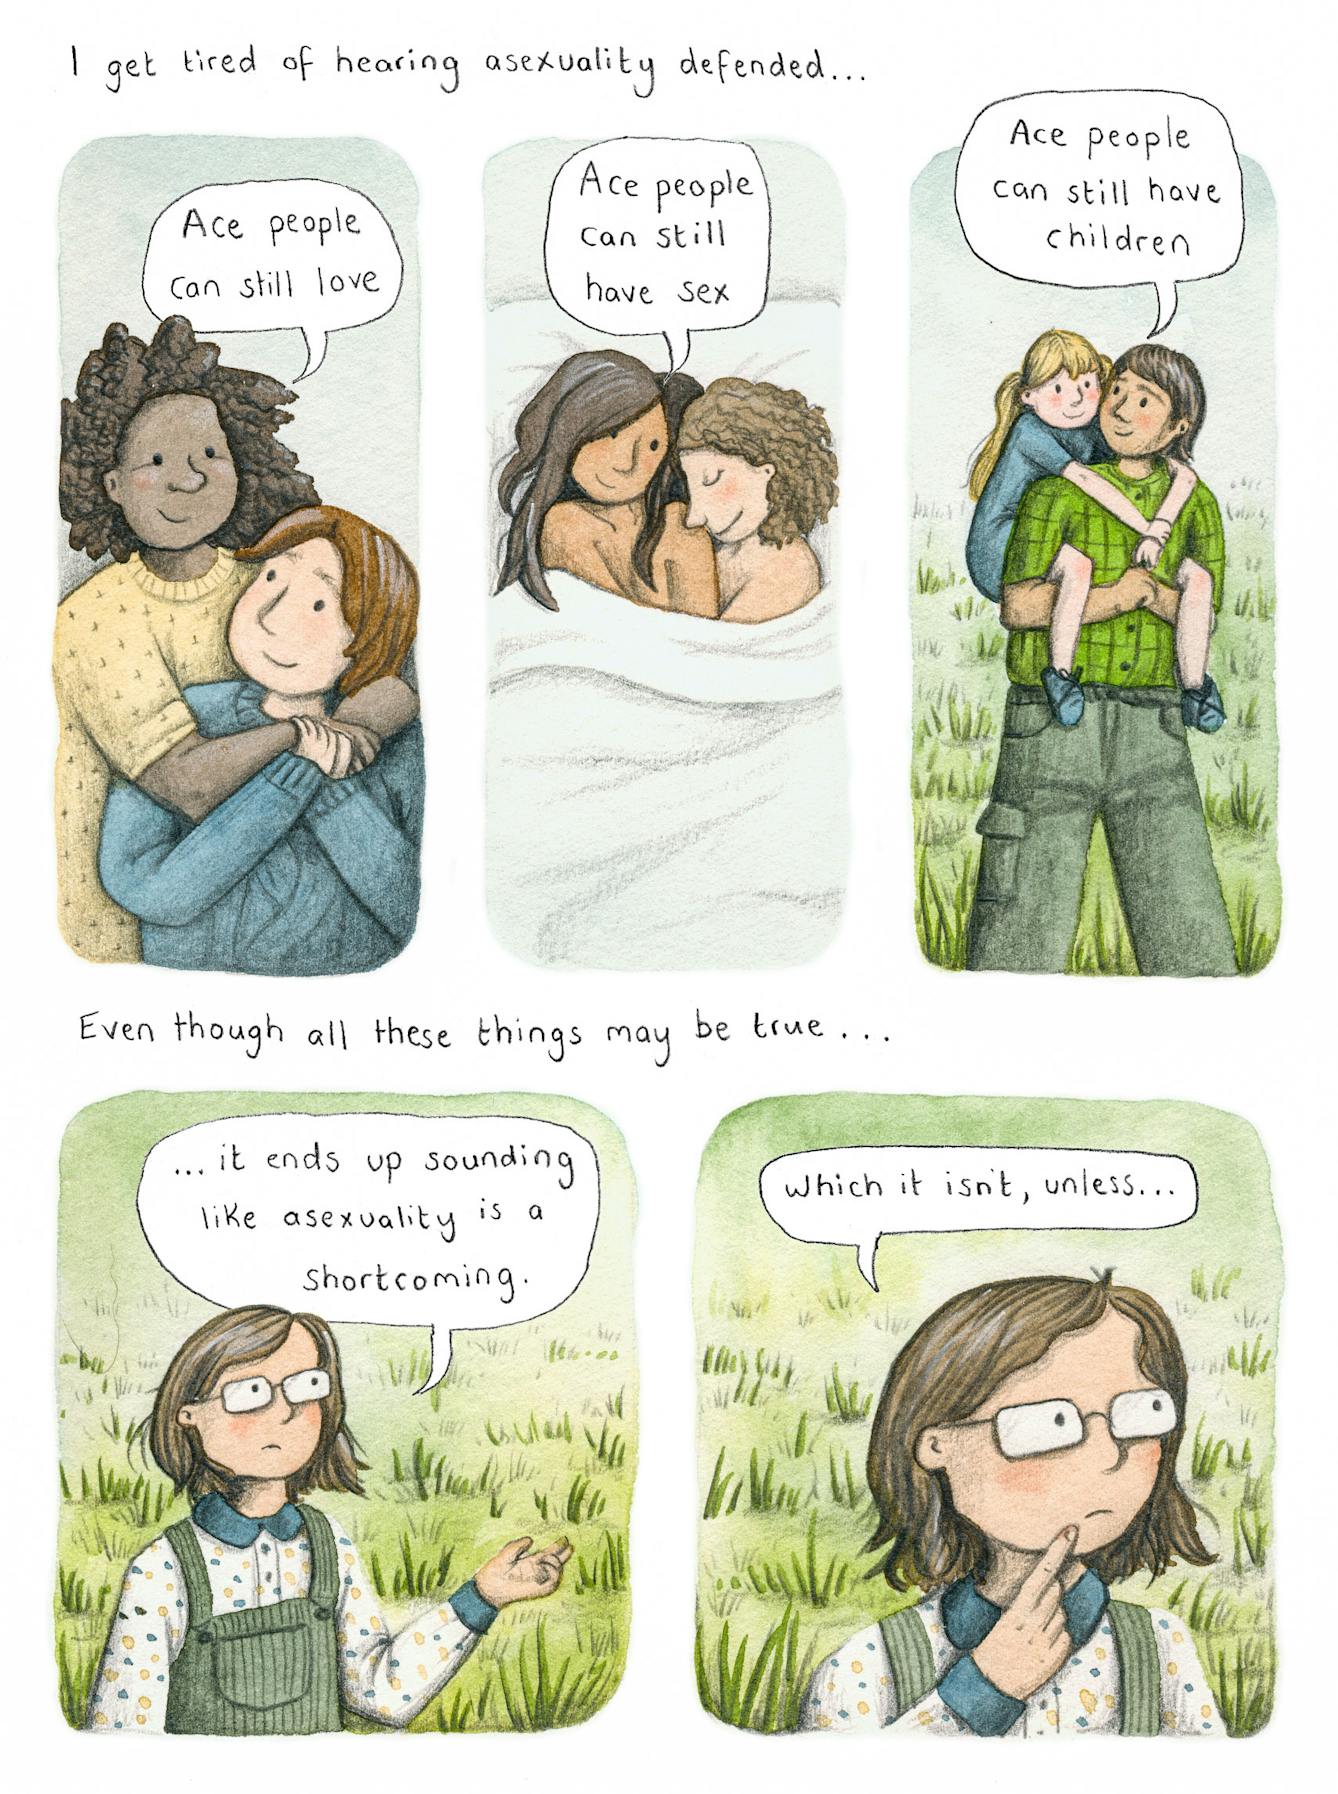 Colourful five panel illustration. 

Text along the top reads 'I get tired of hearing asexuality defended...'

Below this, Panel 1 shows an illustration of two people hugging, they are both smiling. There is a speech bubble reading 'Ace people can still love'. 

Panel 2 shows two people naked in bed, smiling at each other. There is a speech bubble reading 'Ace people can still have sex'. 

Panel 3 shows a person with a child on their back with their arms around their neck. They are smiling at each other. A speech bubble reads 'Ace people can still have children'. 

Text below this reads 'Even though all these things may be true...'

Panel 4 shows a person with person with shoulder length brown hair looking upset. They are wearing glasses, a polka dot top and a green dungaree dress. A text bubble reads '...it ends up sounding like asexuality is a shortcoming.'

Panel 5 shows the same character, closer up. The text bubble reads 'which it isn't, unless....'